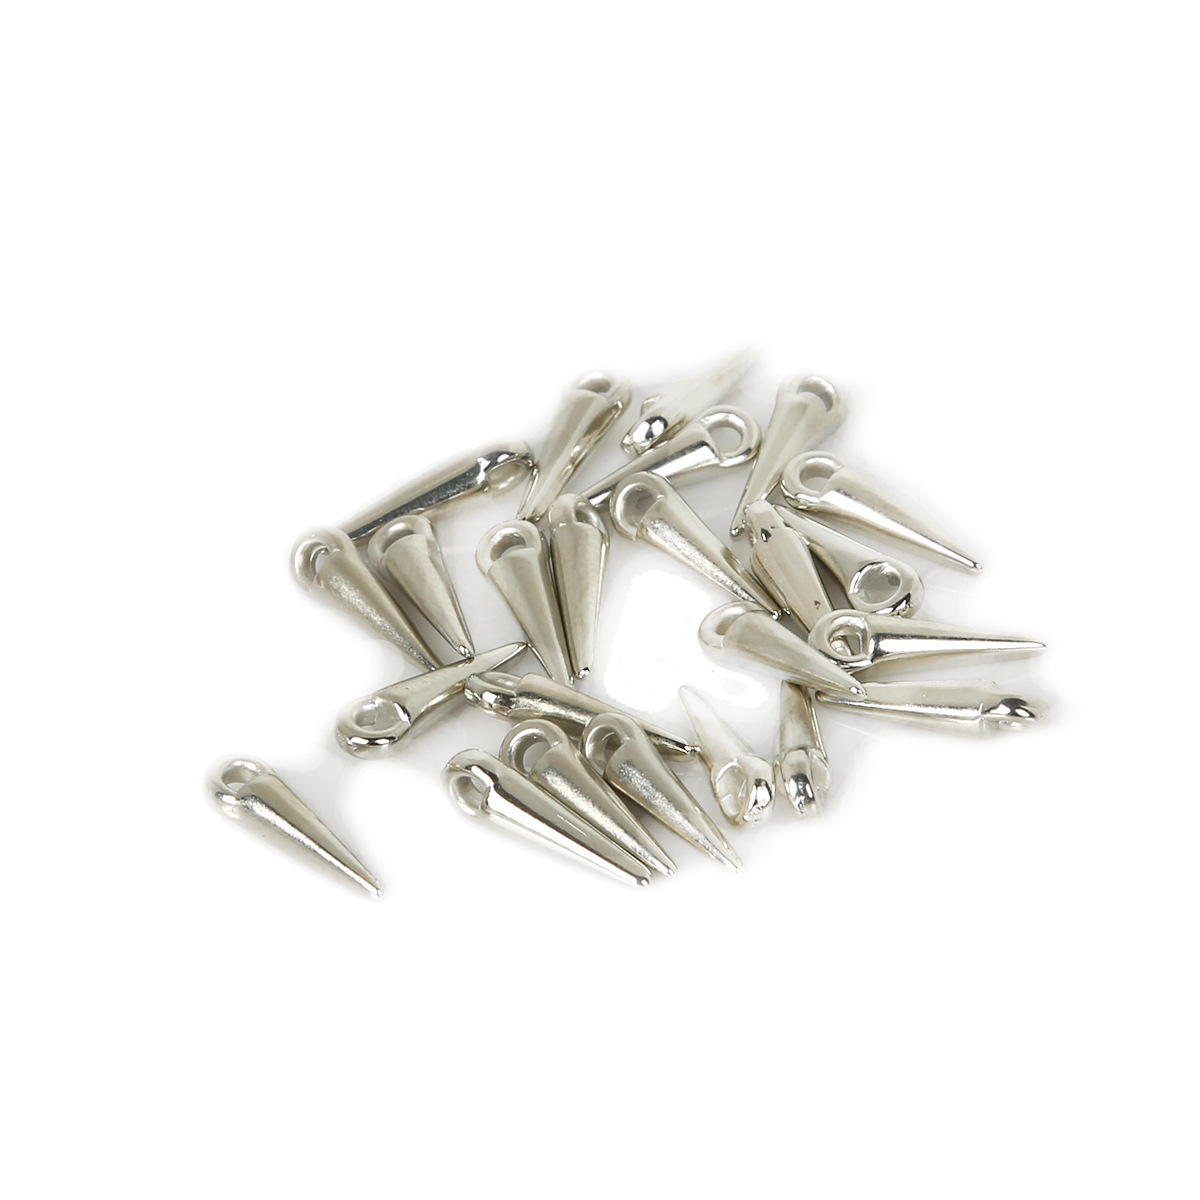 White K spike pendant 4 x 13 mm approximately 200 pieces / pack